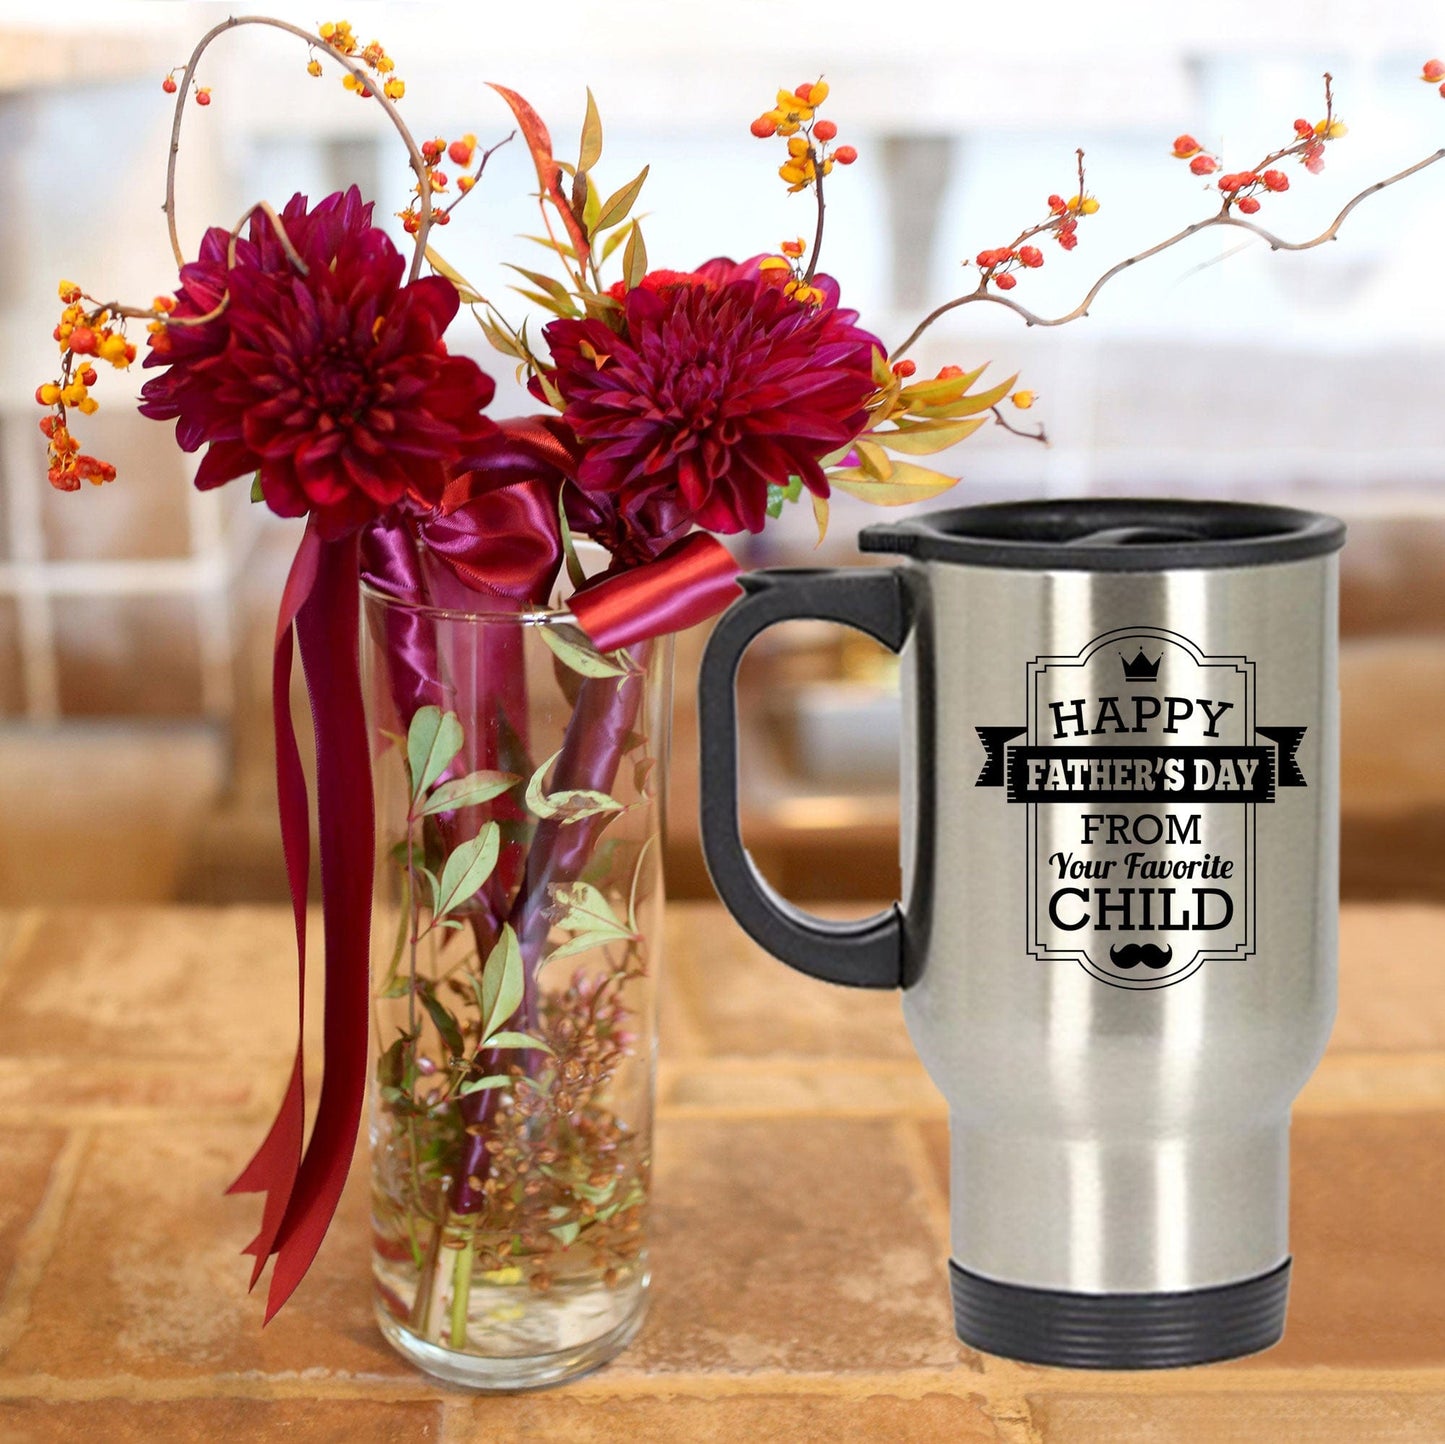 Funny Father's Day Travel Mug from Favorite Child